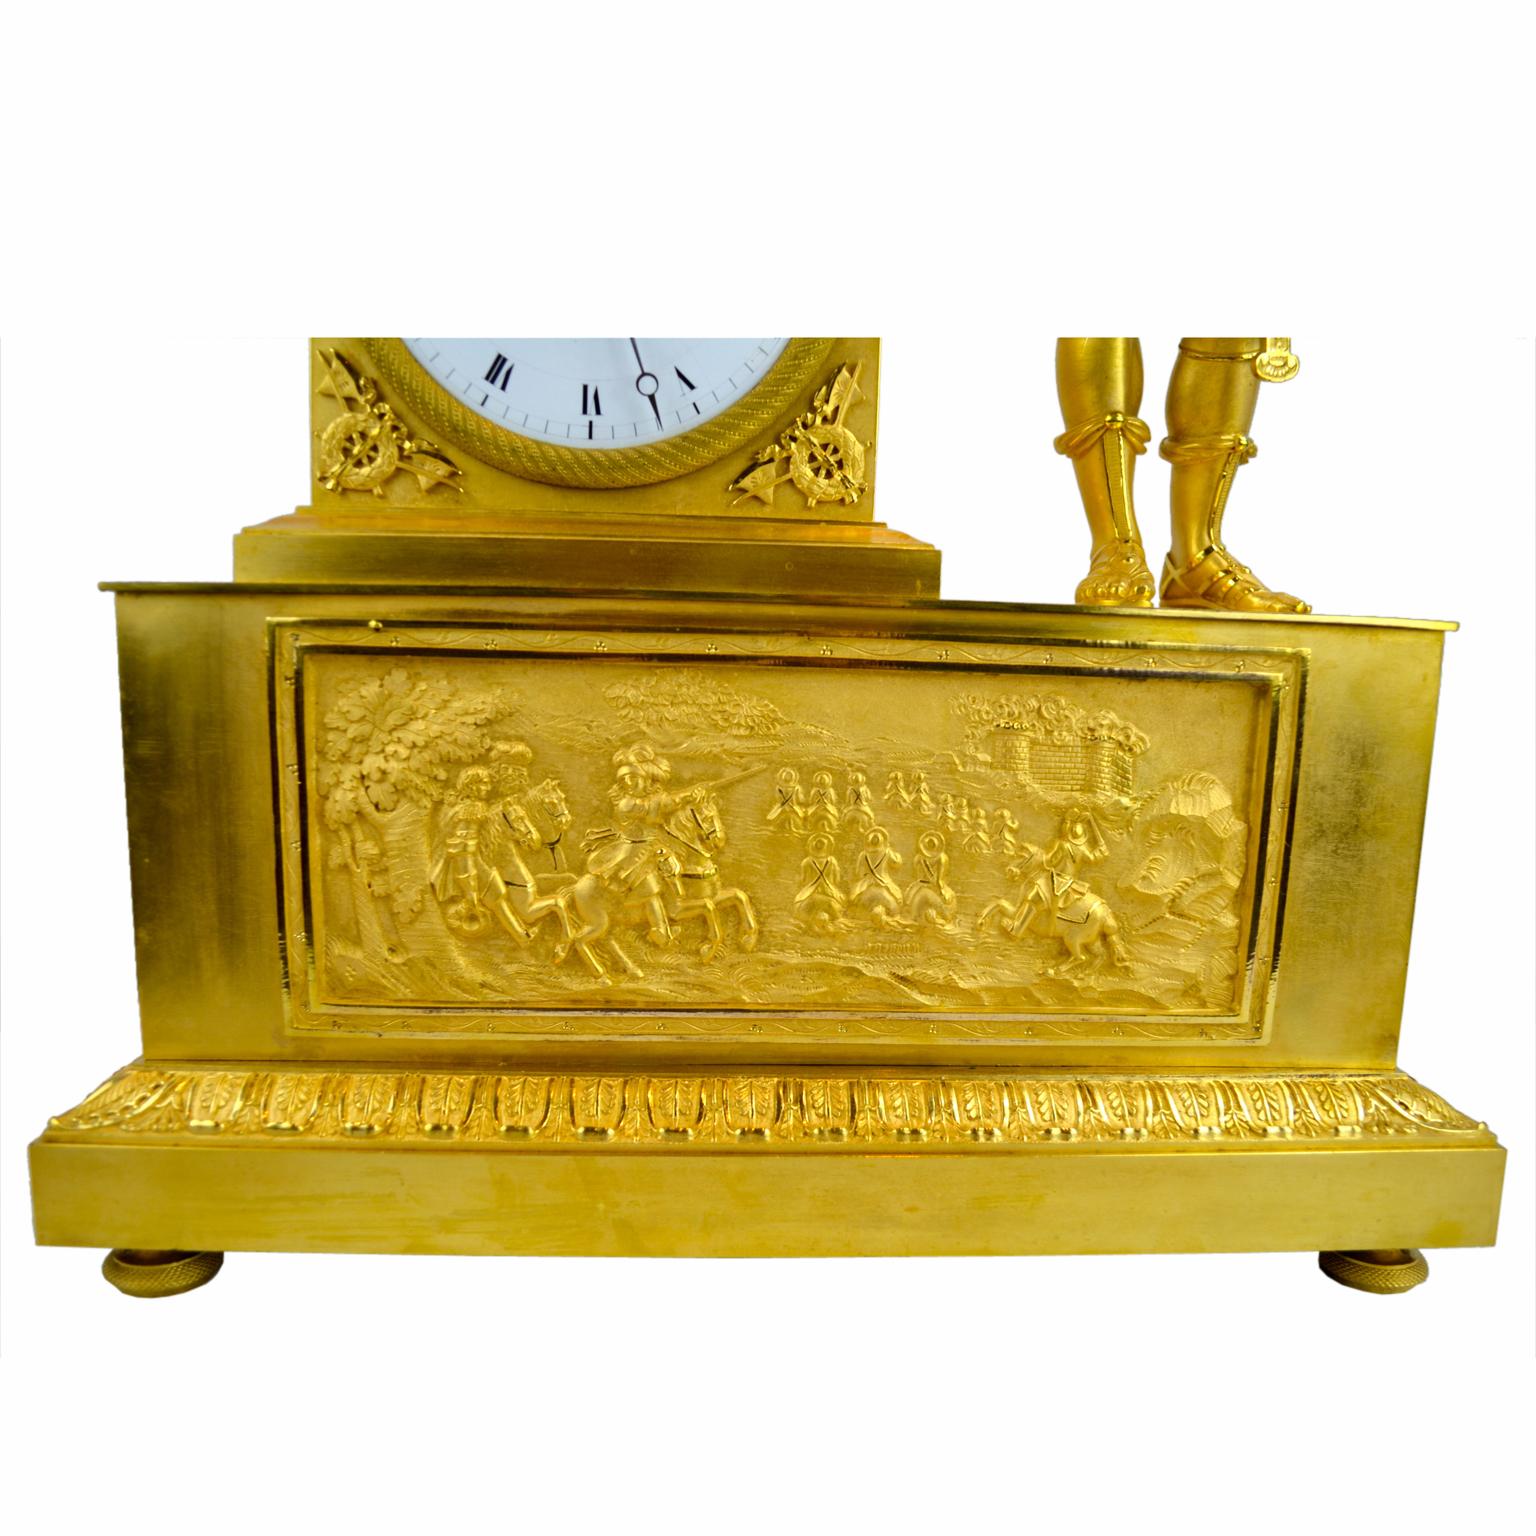 19th Century French Empire clock showing Louis XVI dressed as Caesar For Sale